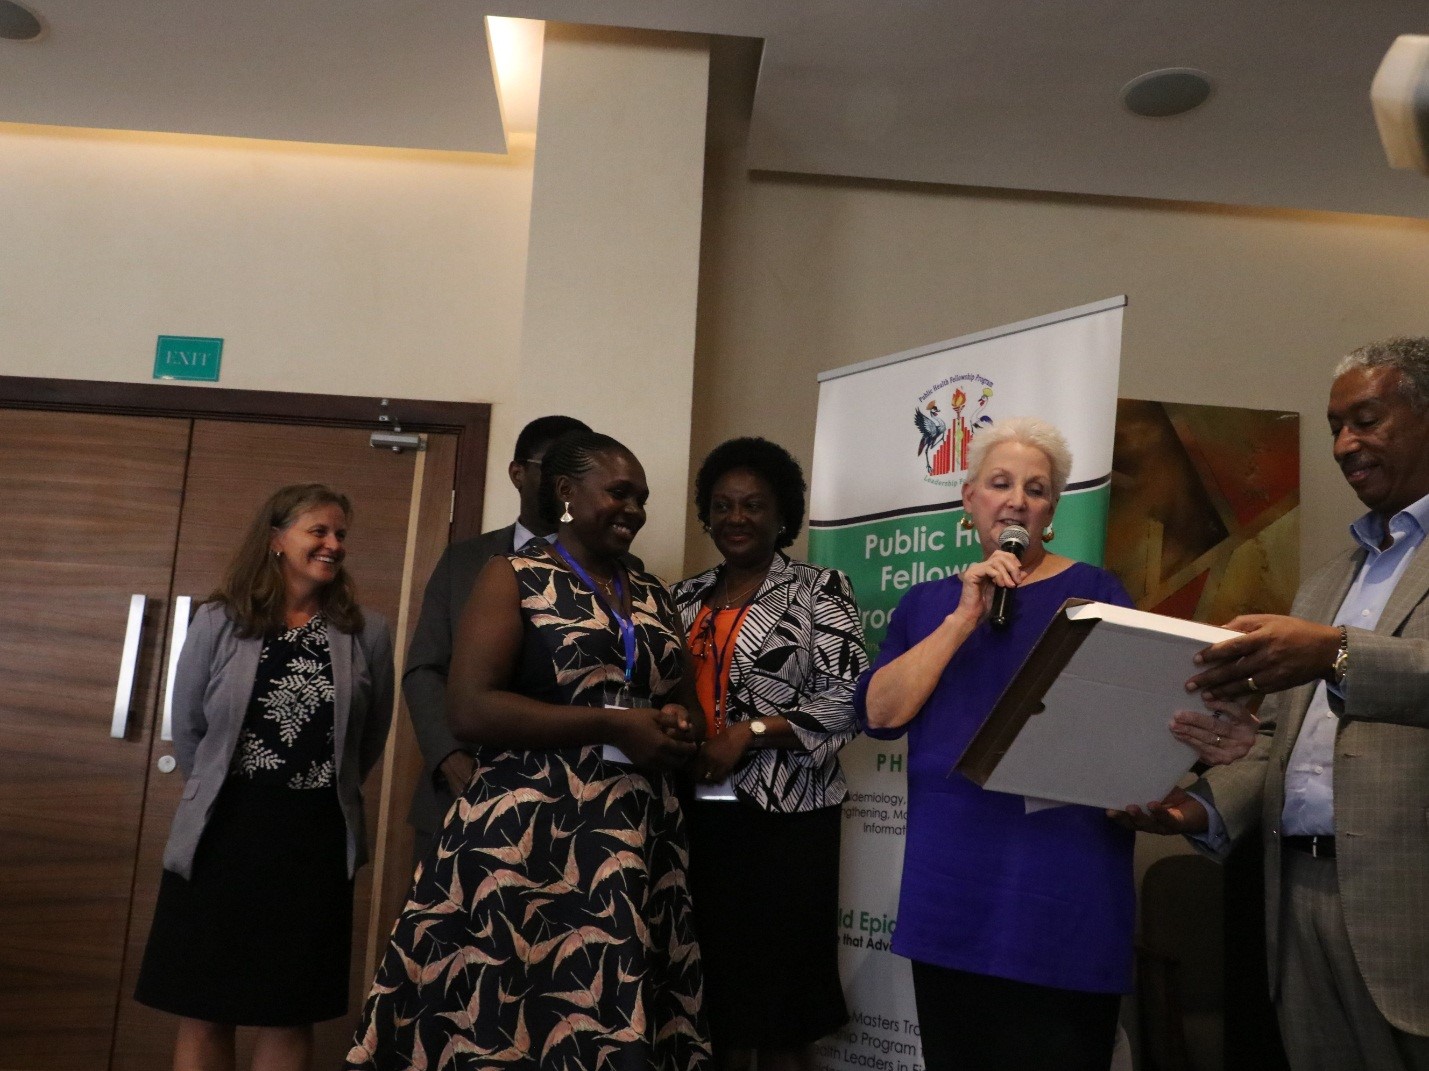 Ambassador Malac (second left) reads from a plaque that was awarded to Dr. Kizito (second right) who was voted as the most outstanding fellow by her colleagues